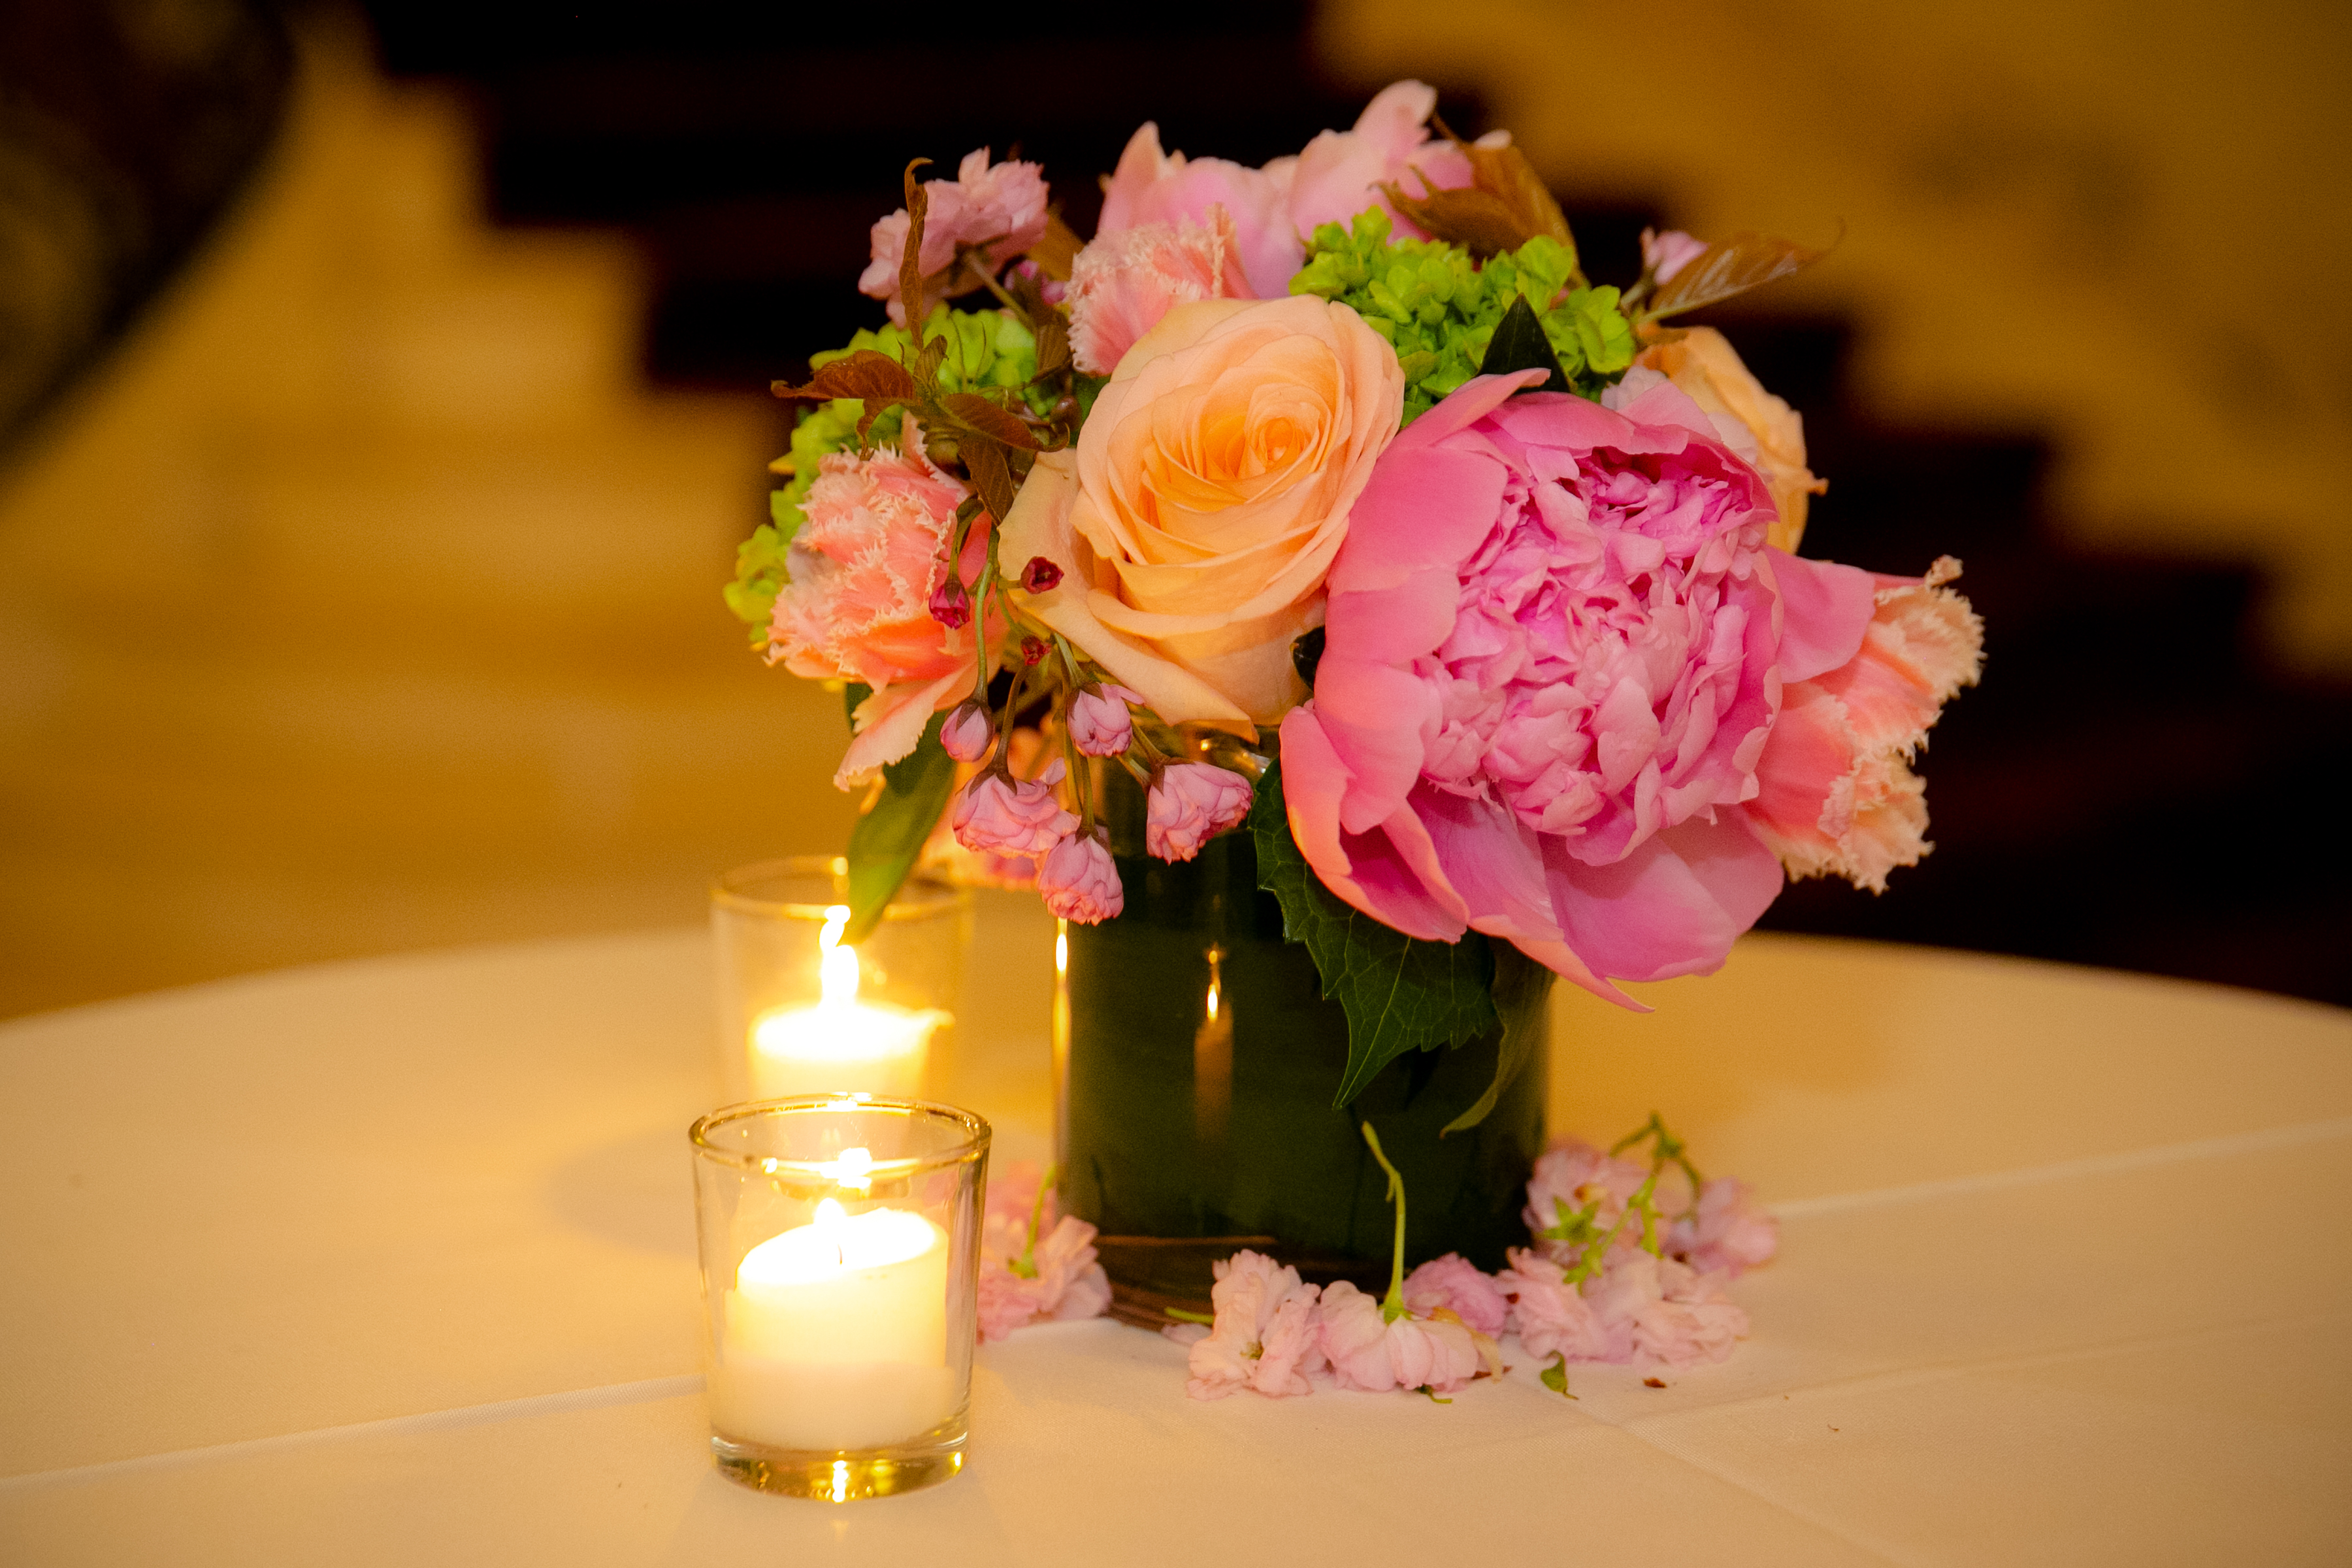 A vase of roses with 2 candles on the table